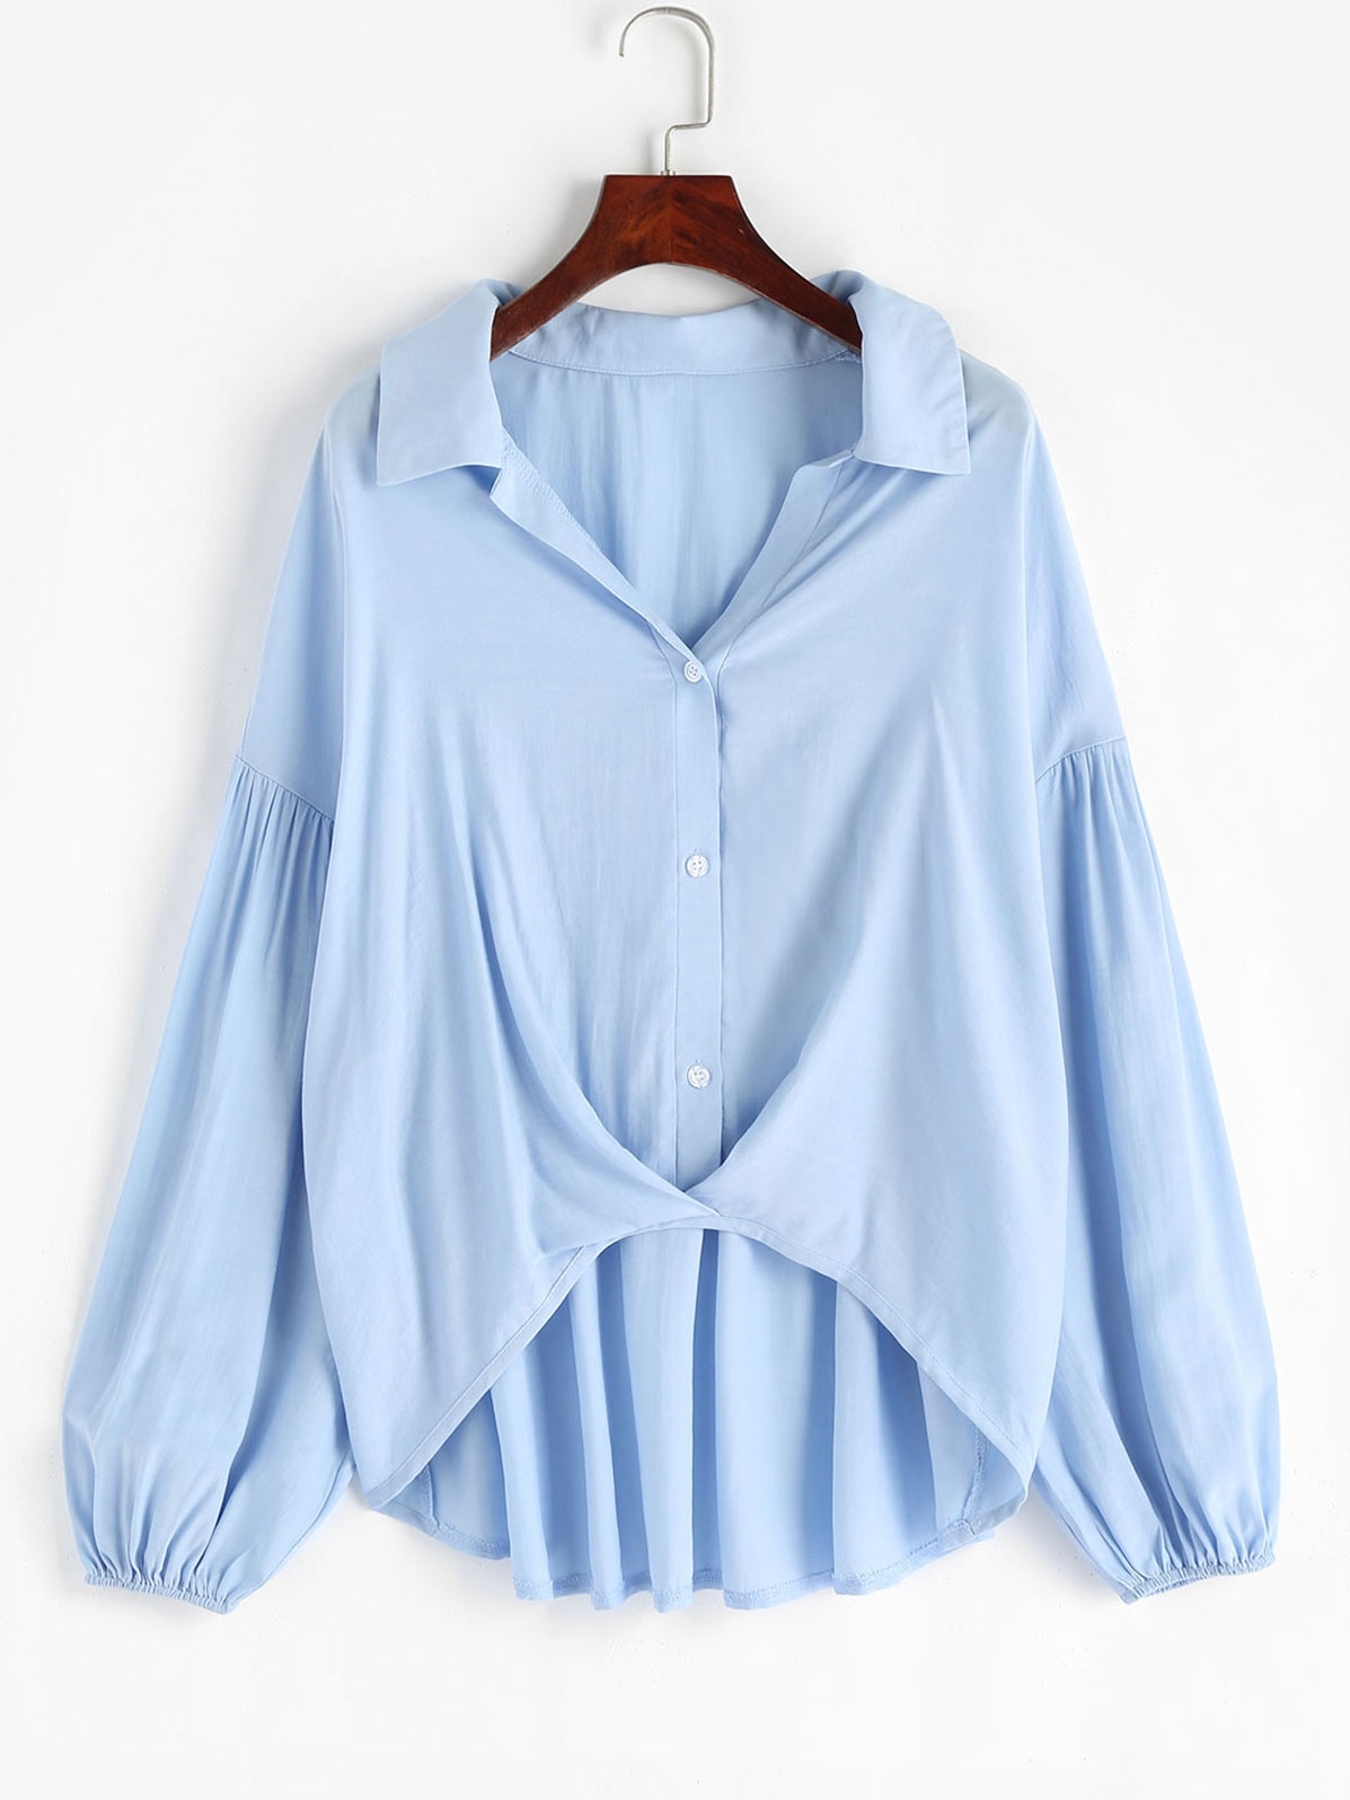 Women's Solid Color Lantern Sleeve Button Down Triangle Collared Tops,  Elegant Shirts For Work, Women's Clothing